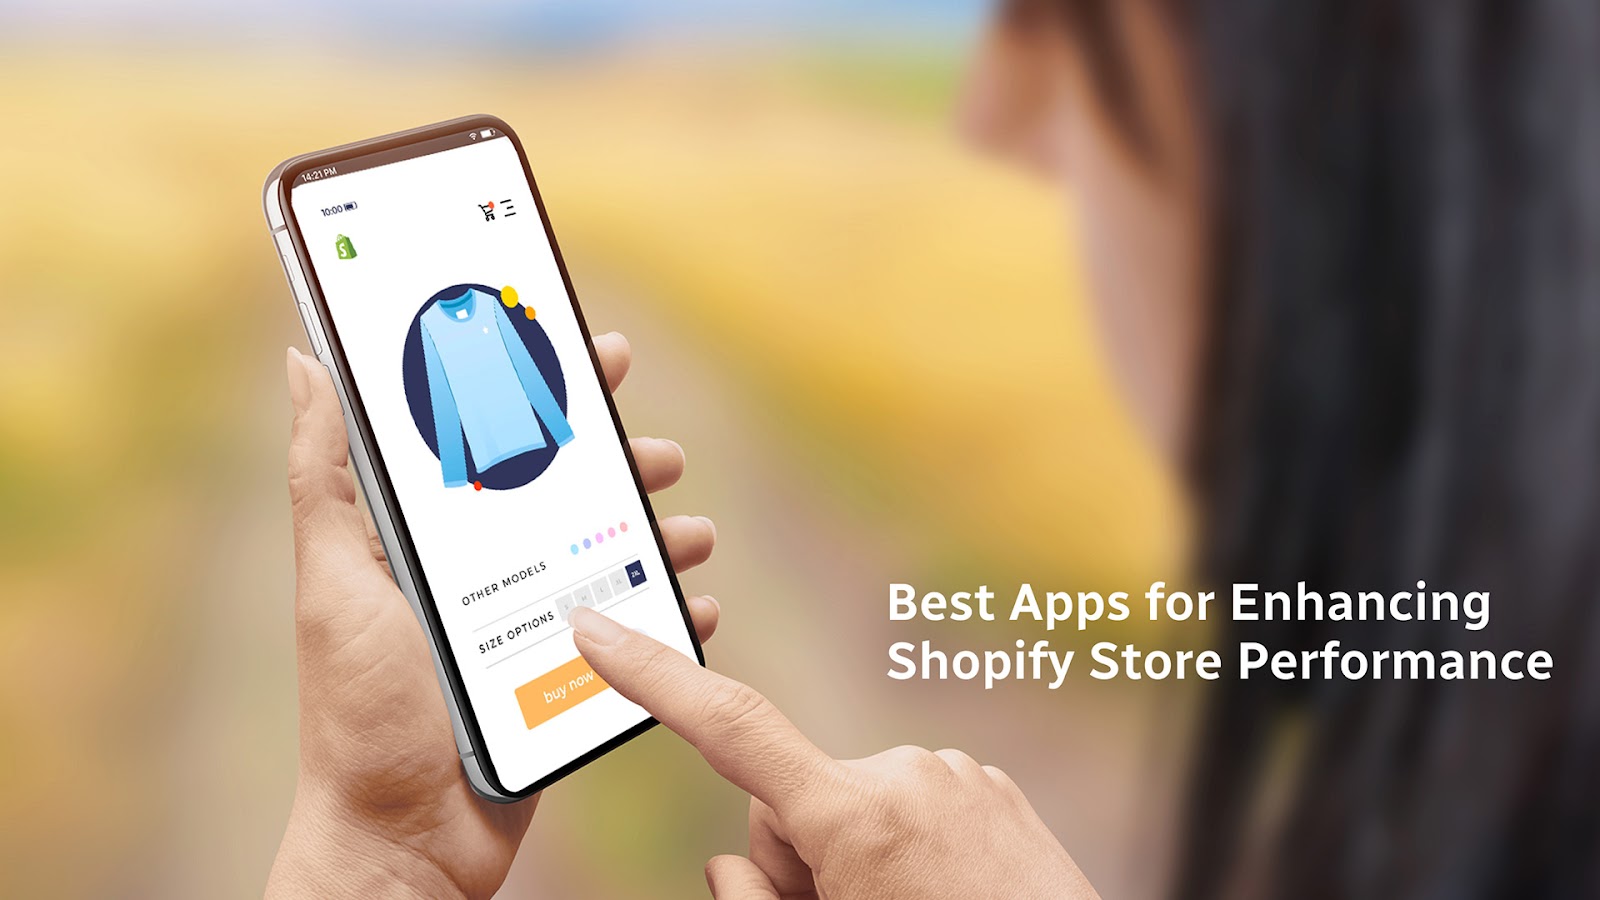 Best Apps for Enhancing Shopify Store Performance